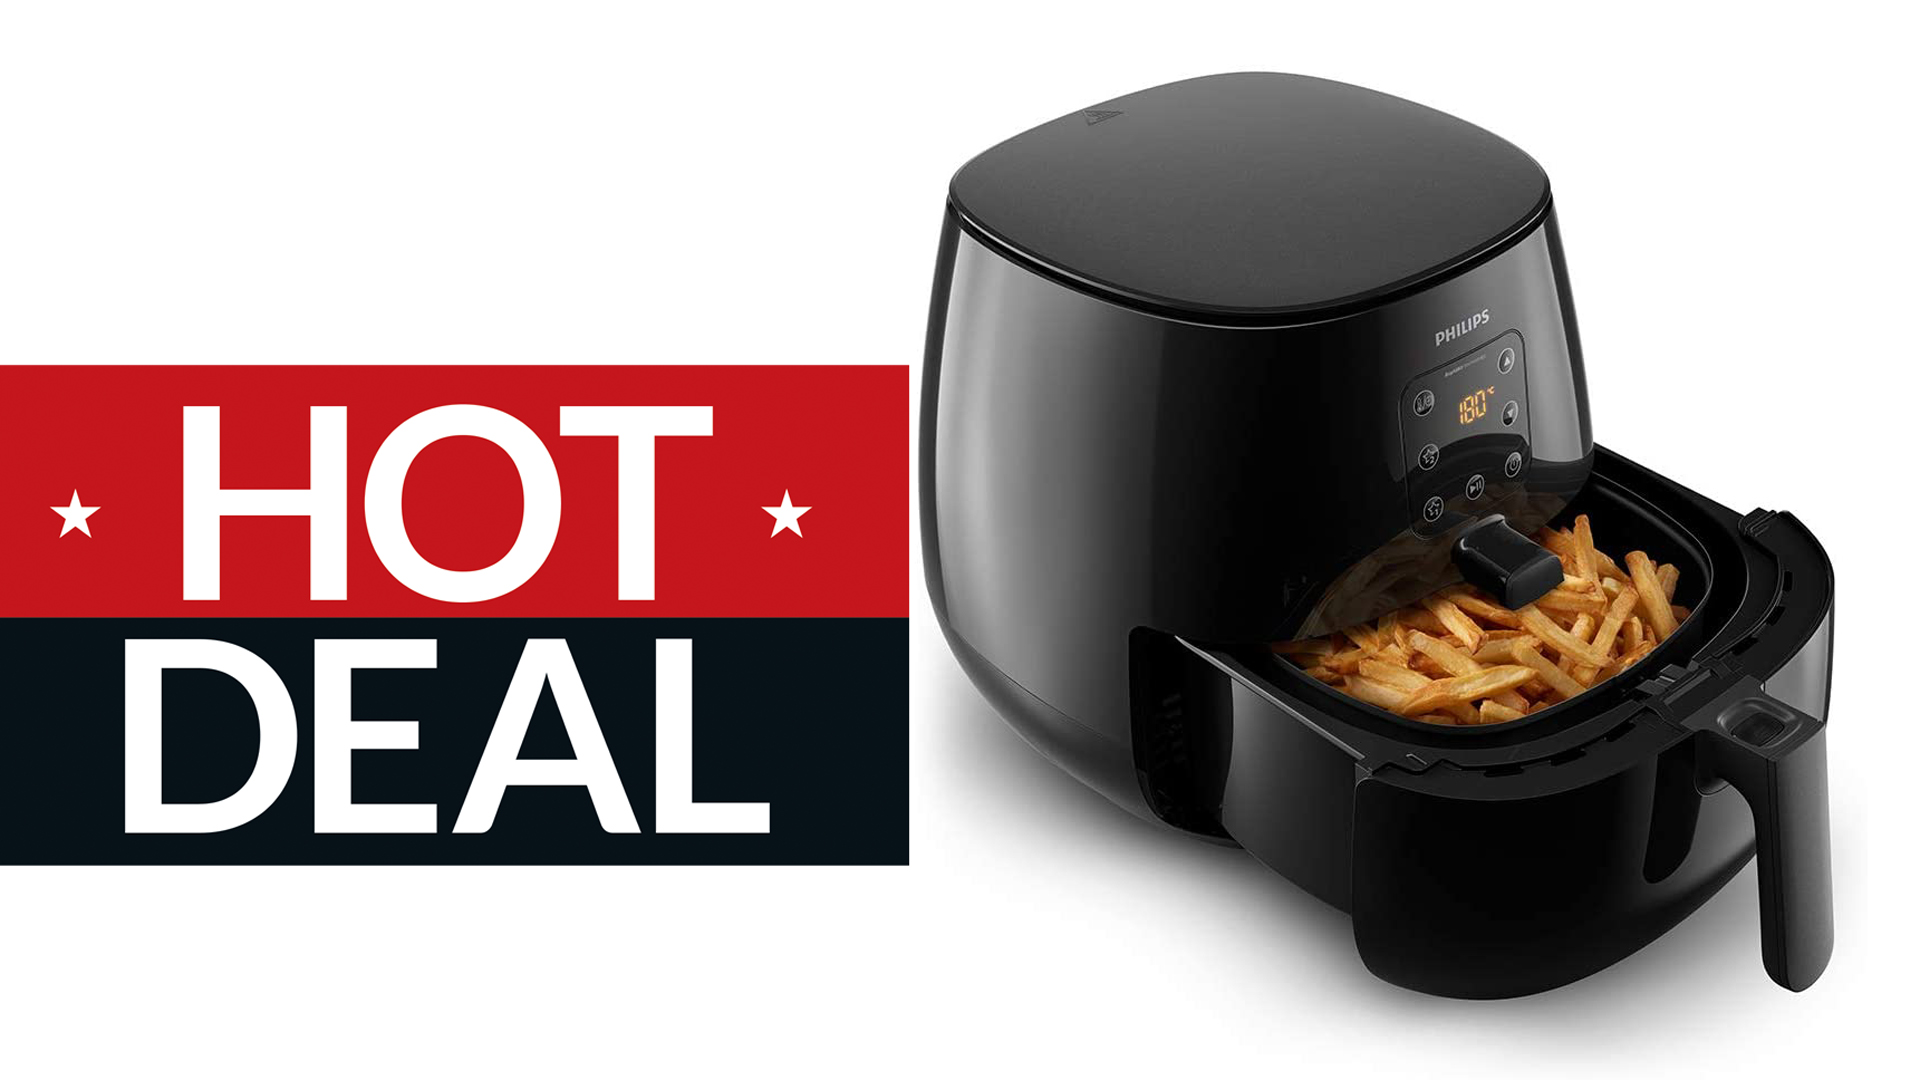 Philips Airfryer XXL review: good things come to those who wait - Galaxus